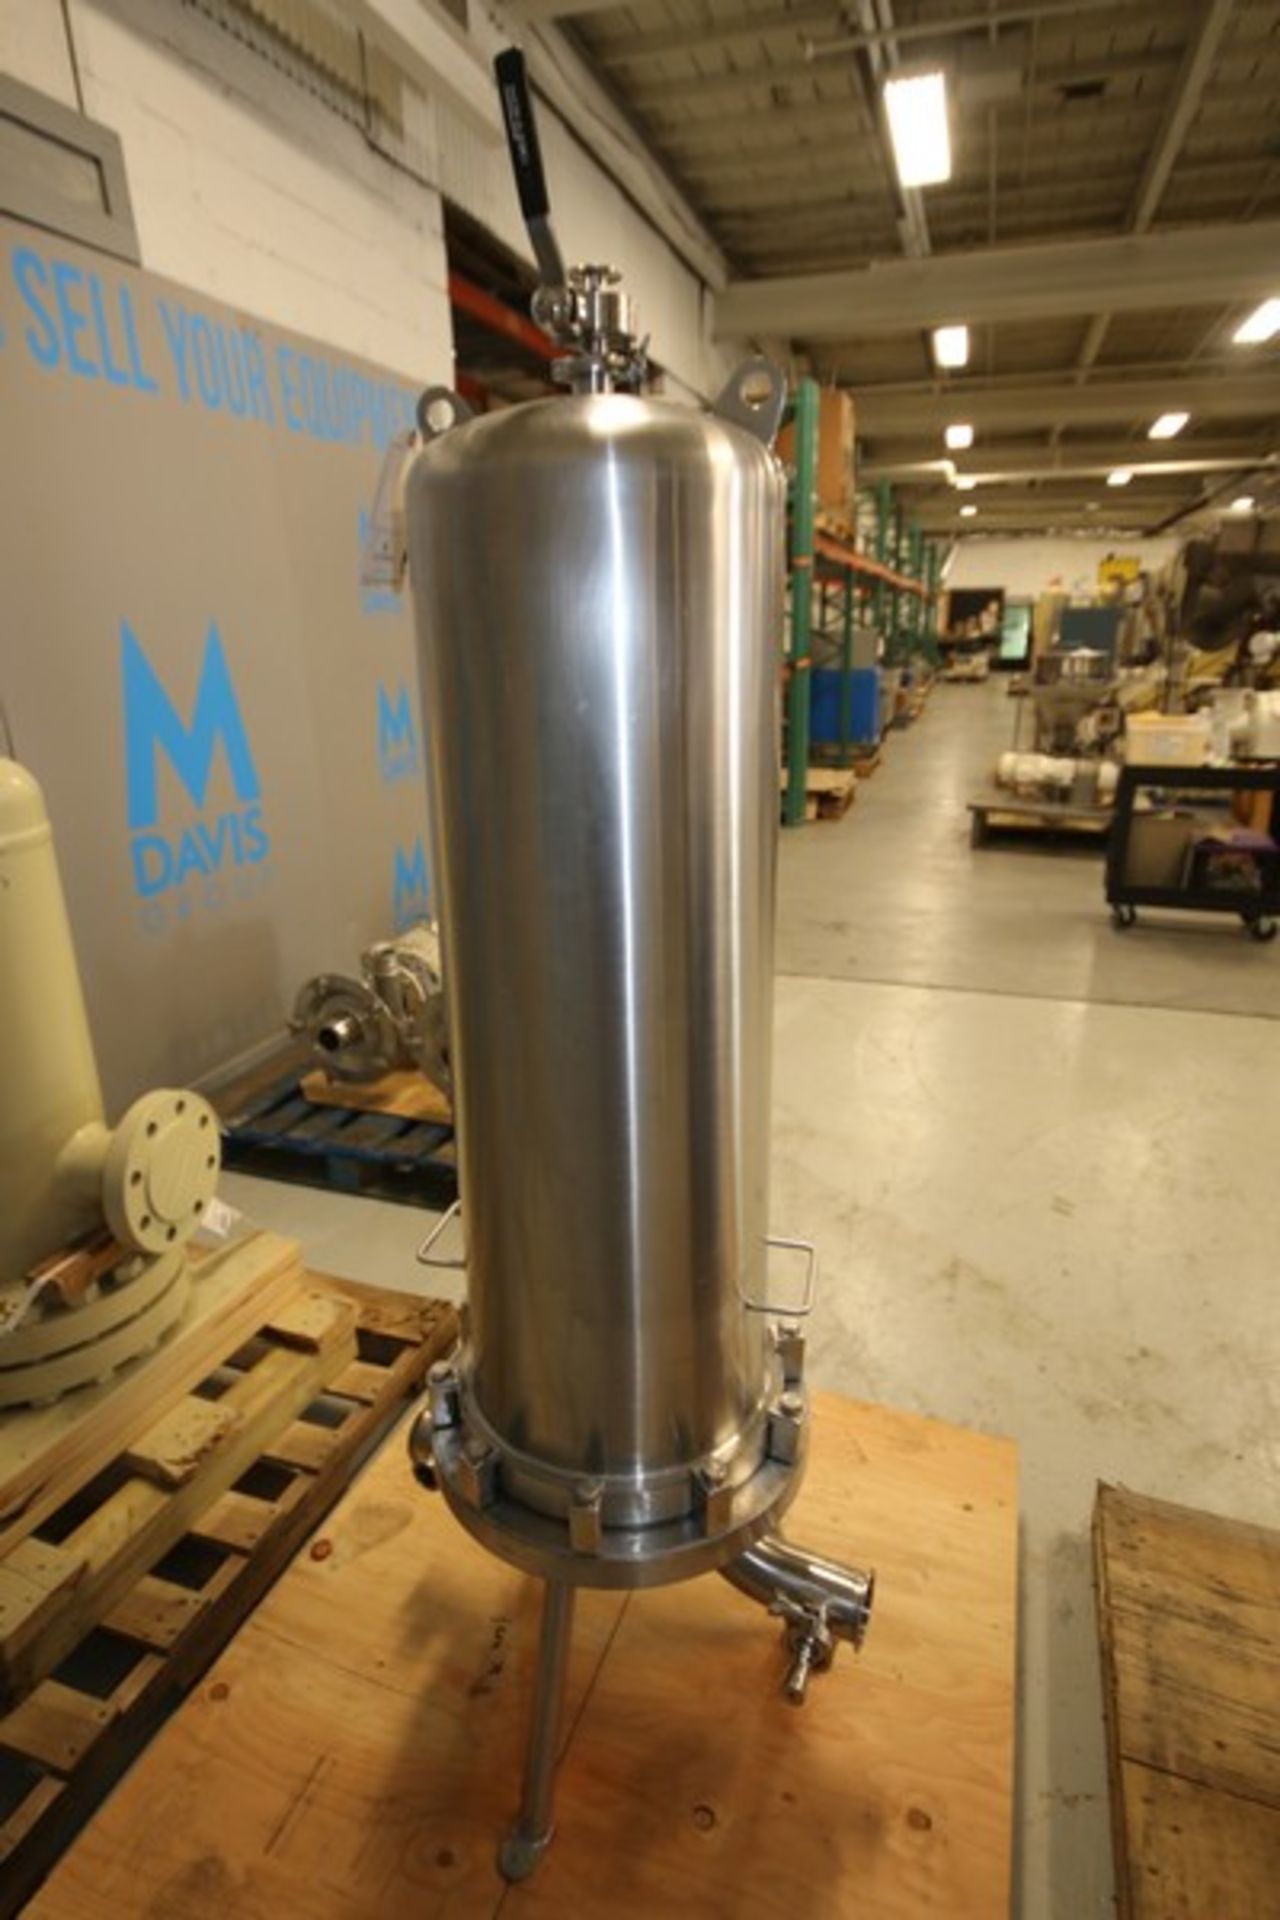 Allegheny Bradford Corp. 4' H x 14" W S/S Filter Housing, SN 13303-1-1-1, with 1.5" Clamp Type Top - Image 2 of 4